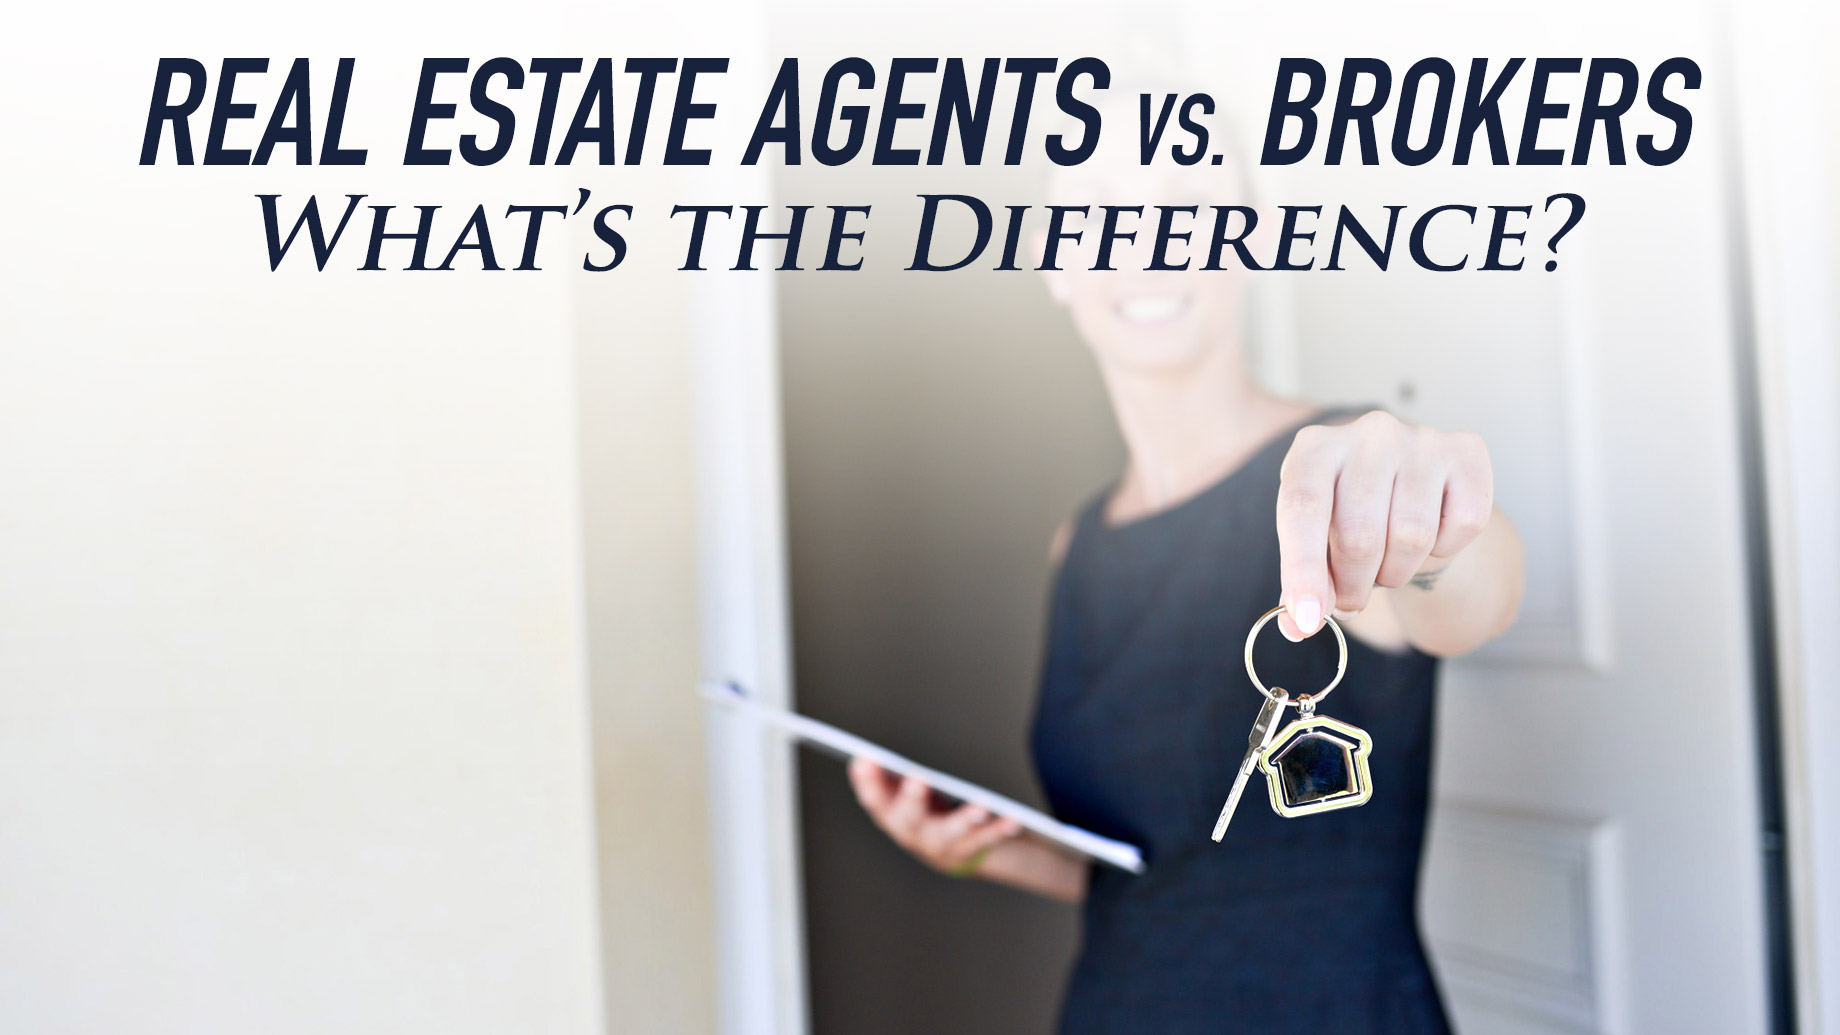 Real Estate Agents vs. Brokers - What's the Difference?